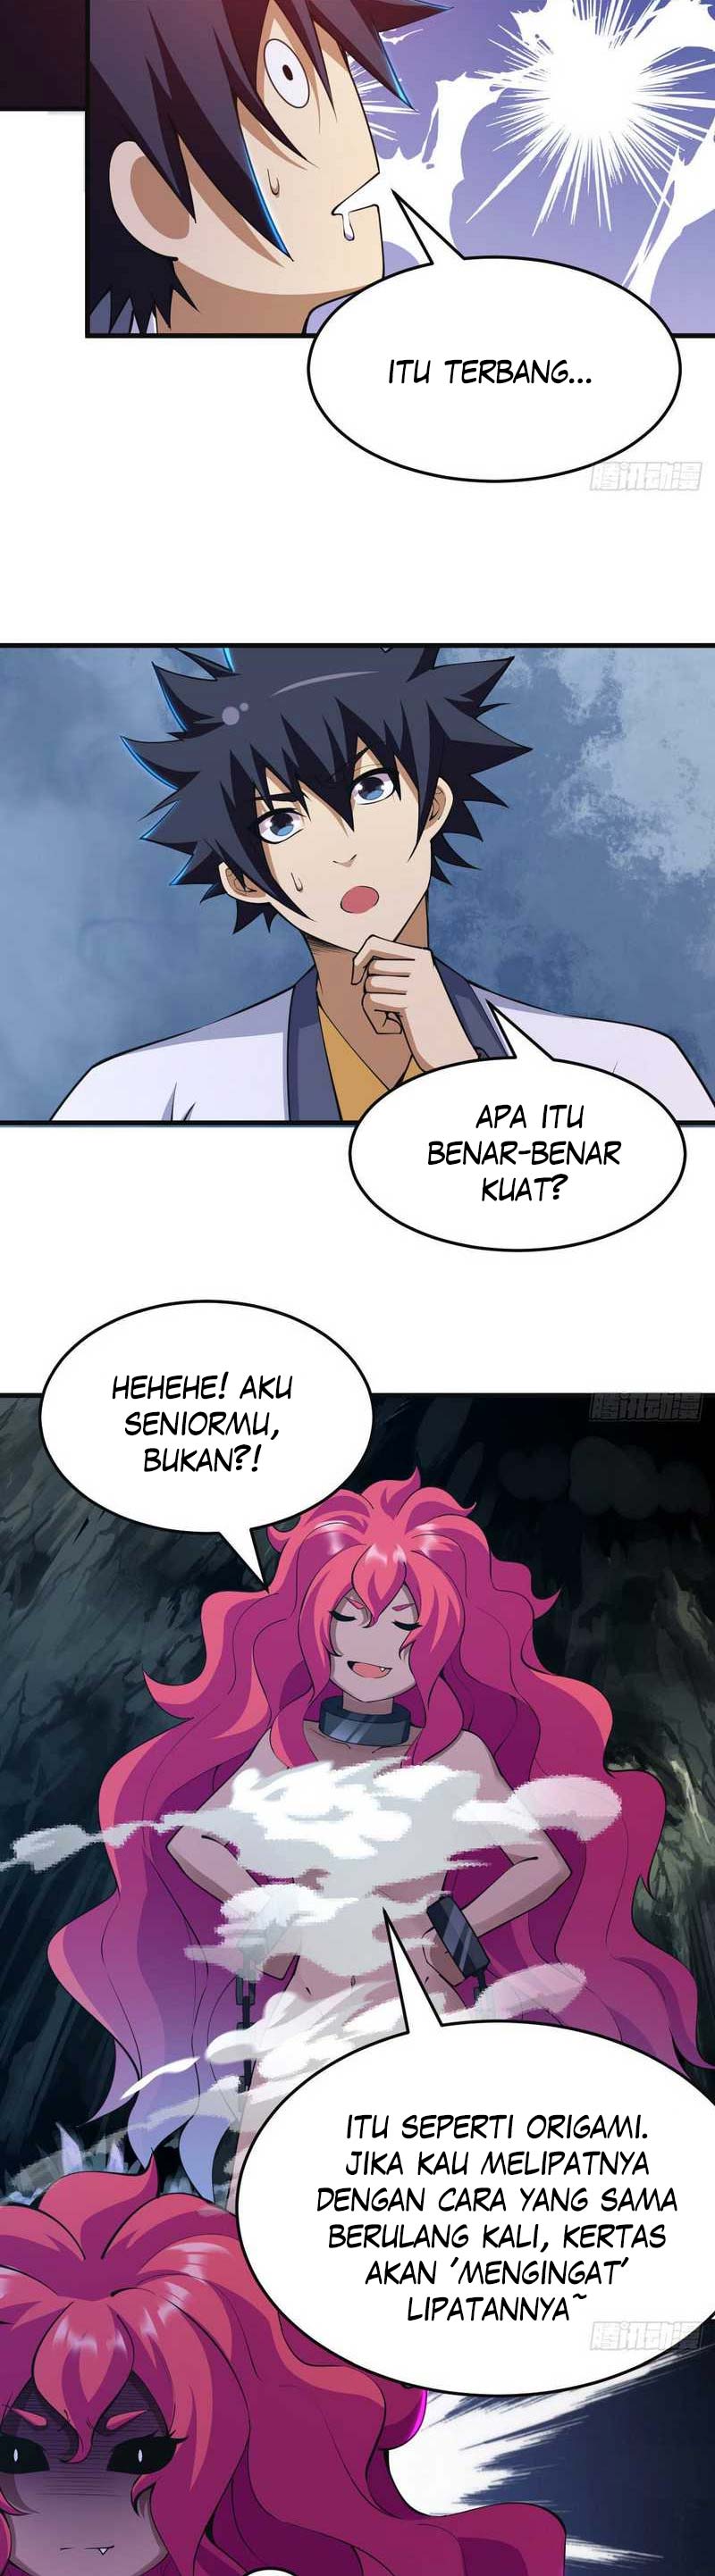 Dilarang COPAS - situs resmi www.mangacanblog.com - Komik i just want to be beaten to death by everyone 083 - chapter 83 84 Indonesia i just want to be beaten to death by everyone 083 - chapter 83 Terbaru 3|Baca Manga Komik Indonesia|Mangacan